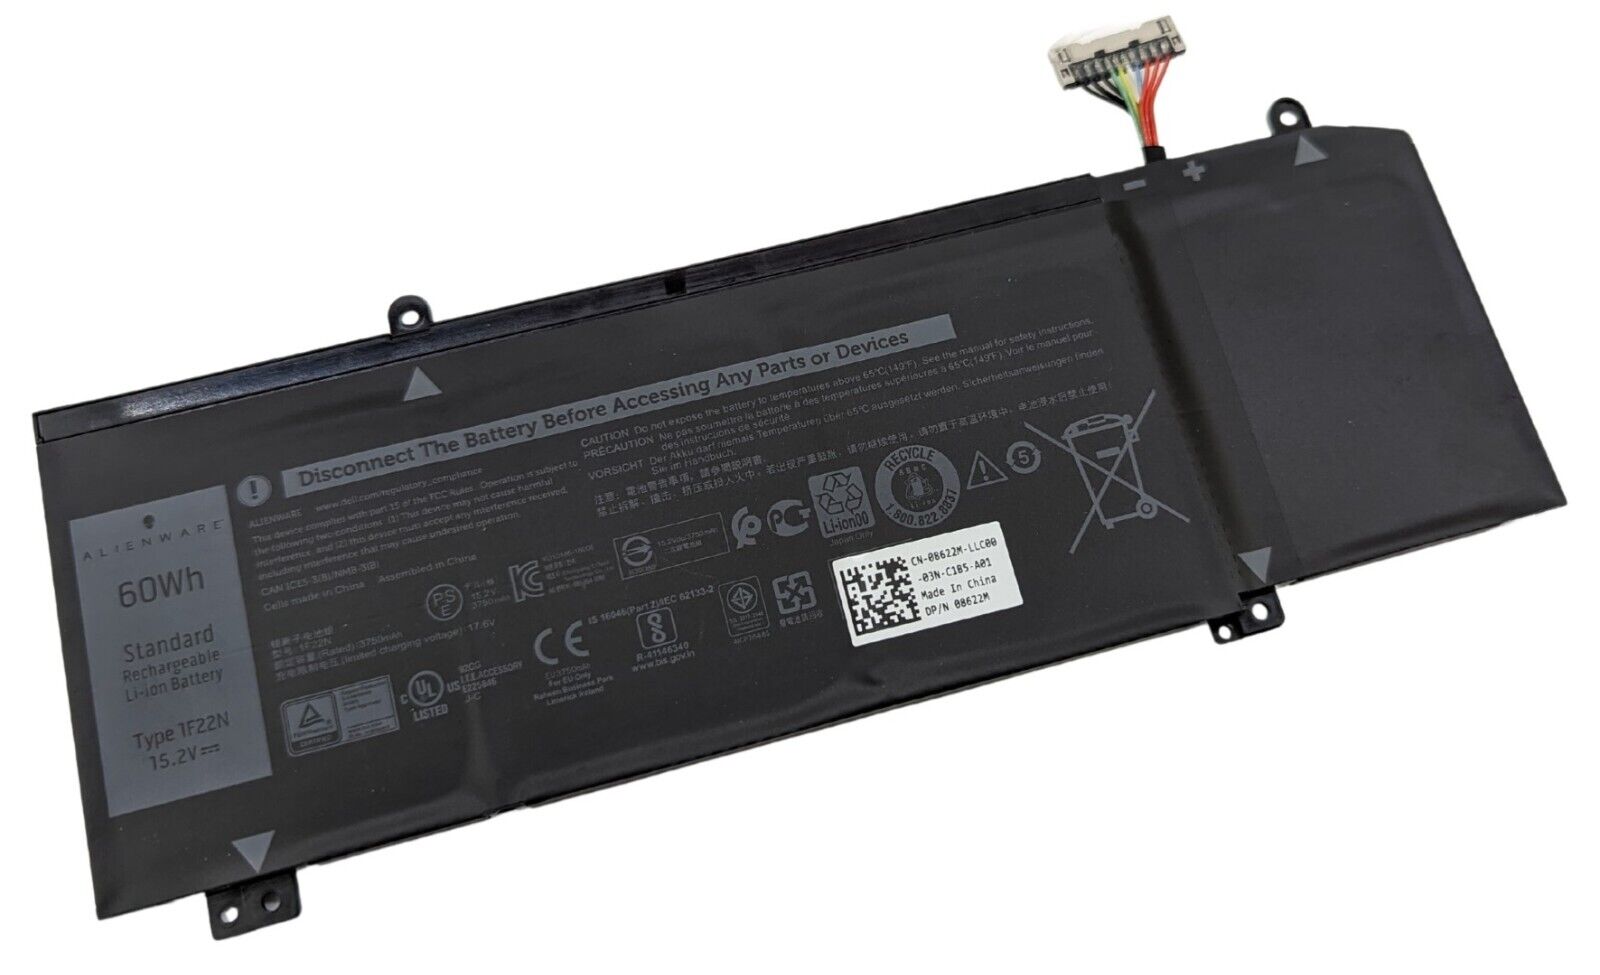 NEW Genuine Alienware M15 M17 G7 7790 60Wh 4-cell Laptop Battery - 1F22N 01F22N